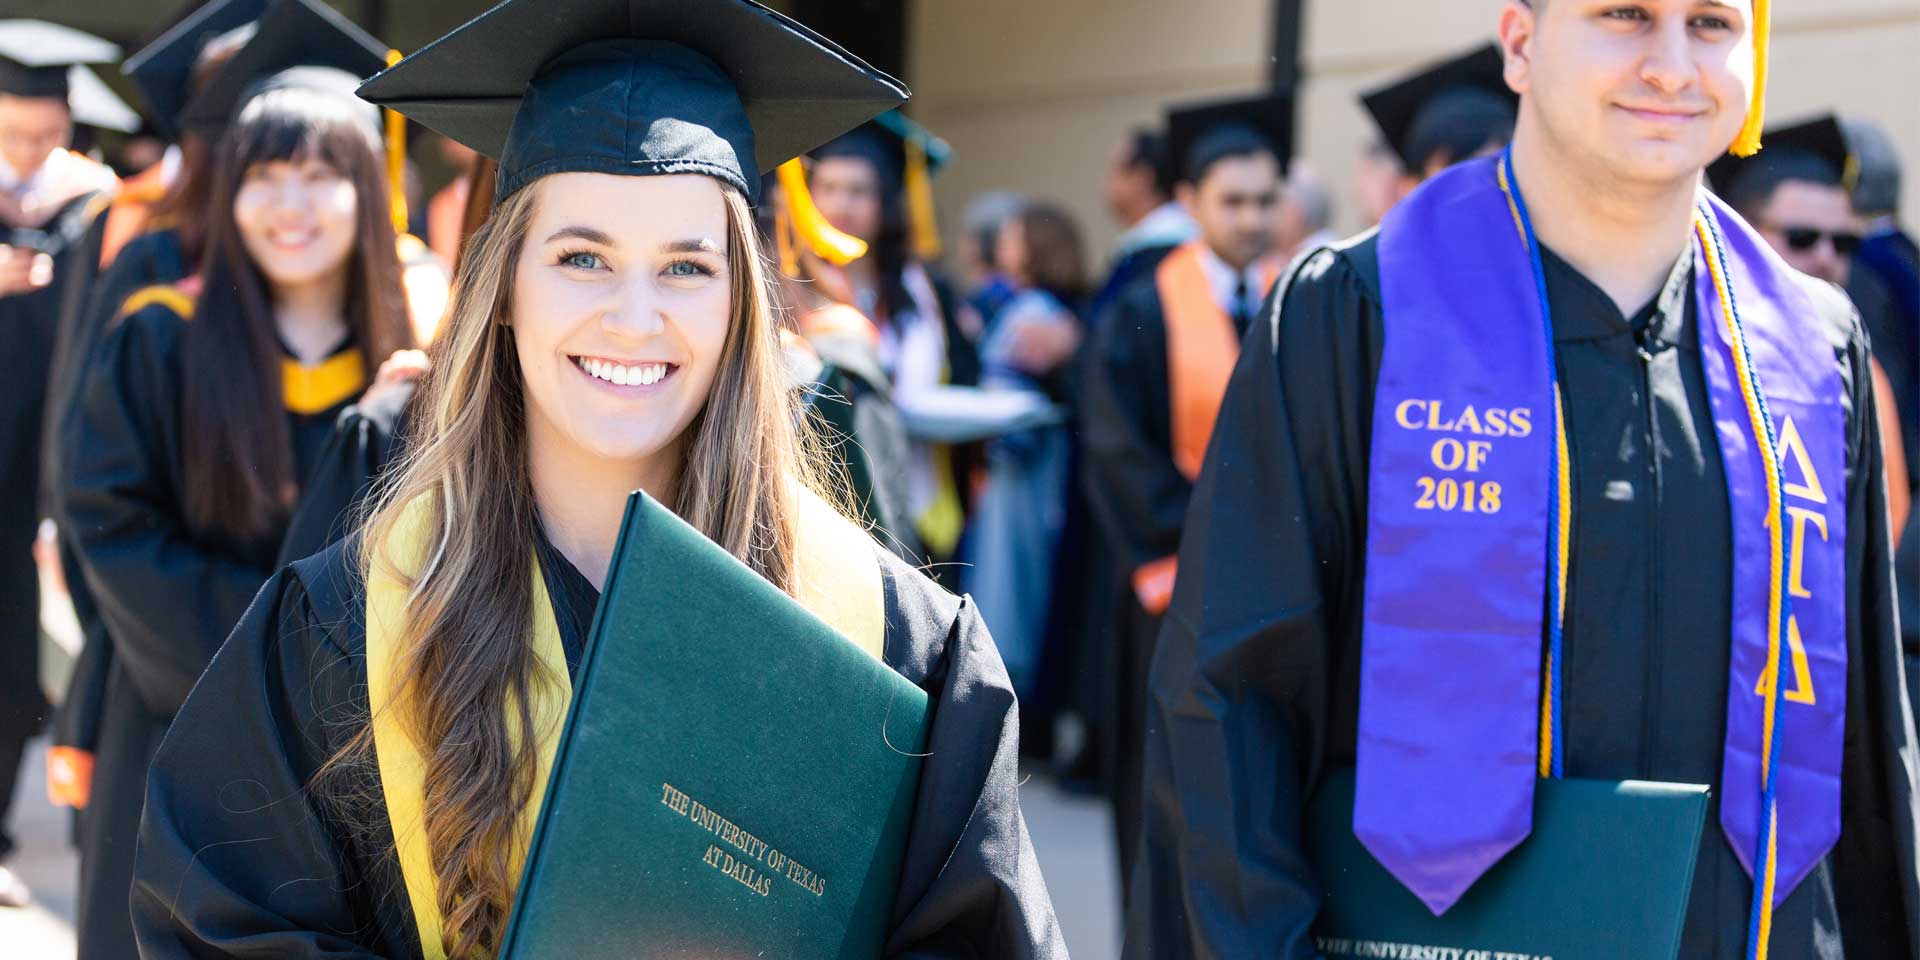 Megan Eckert grins widely after earning her bachelor’s degree in finance.